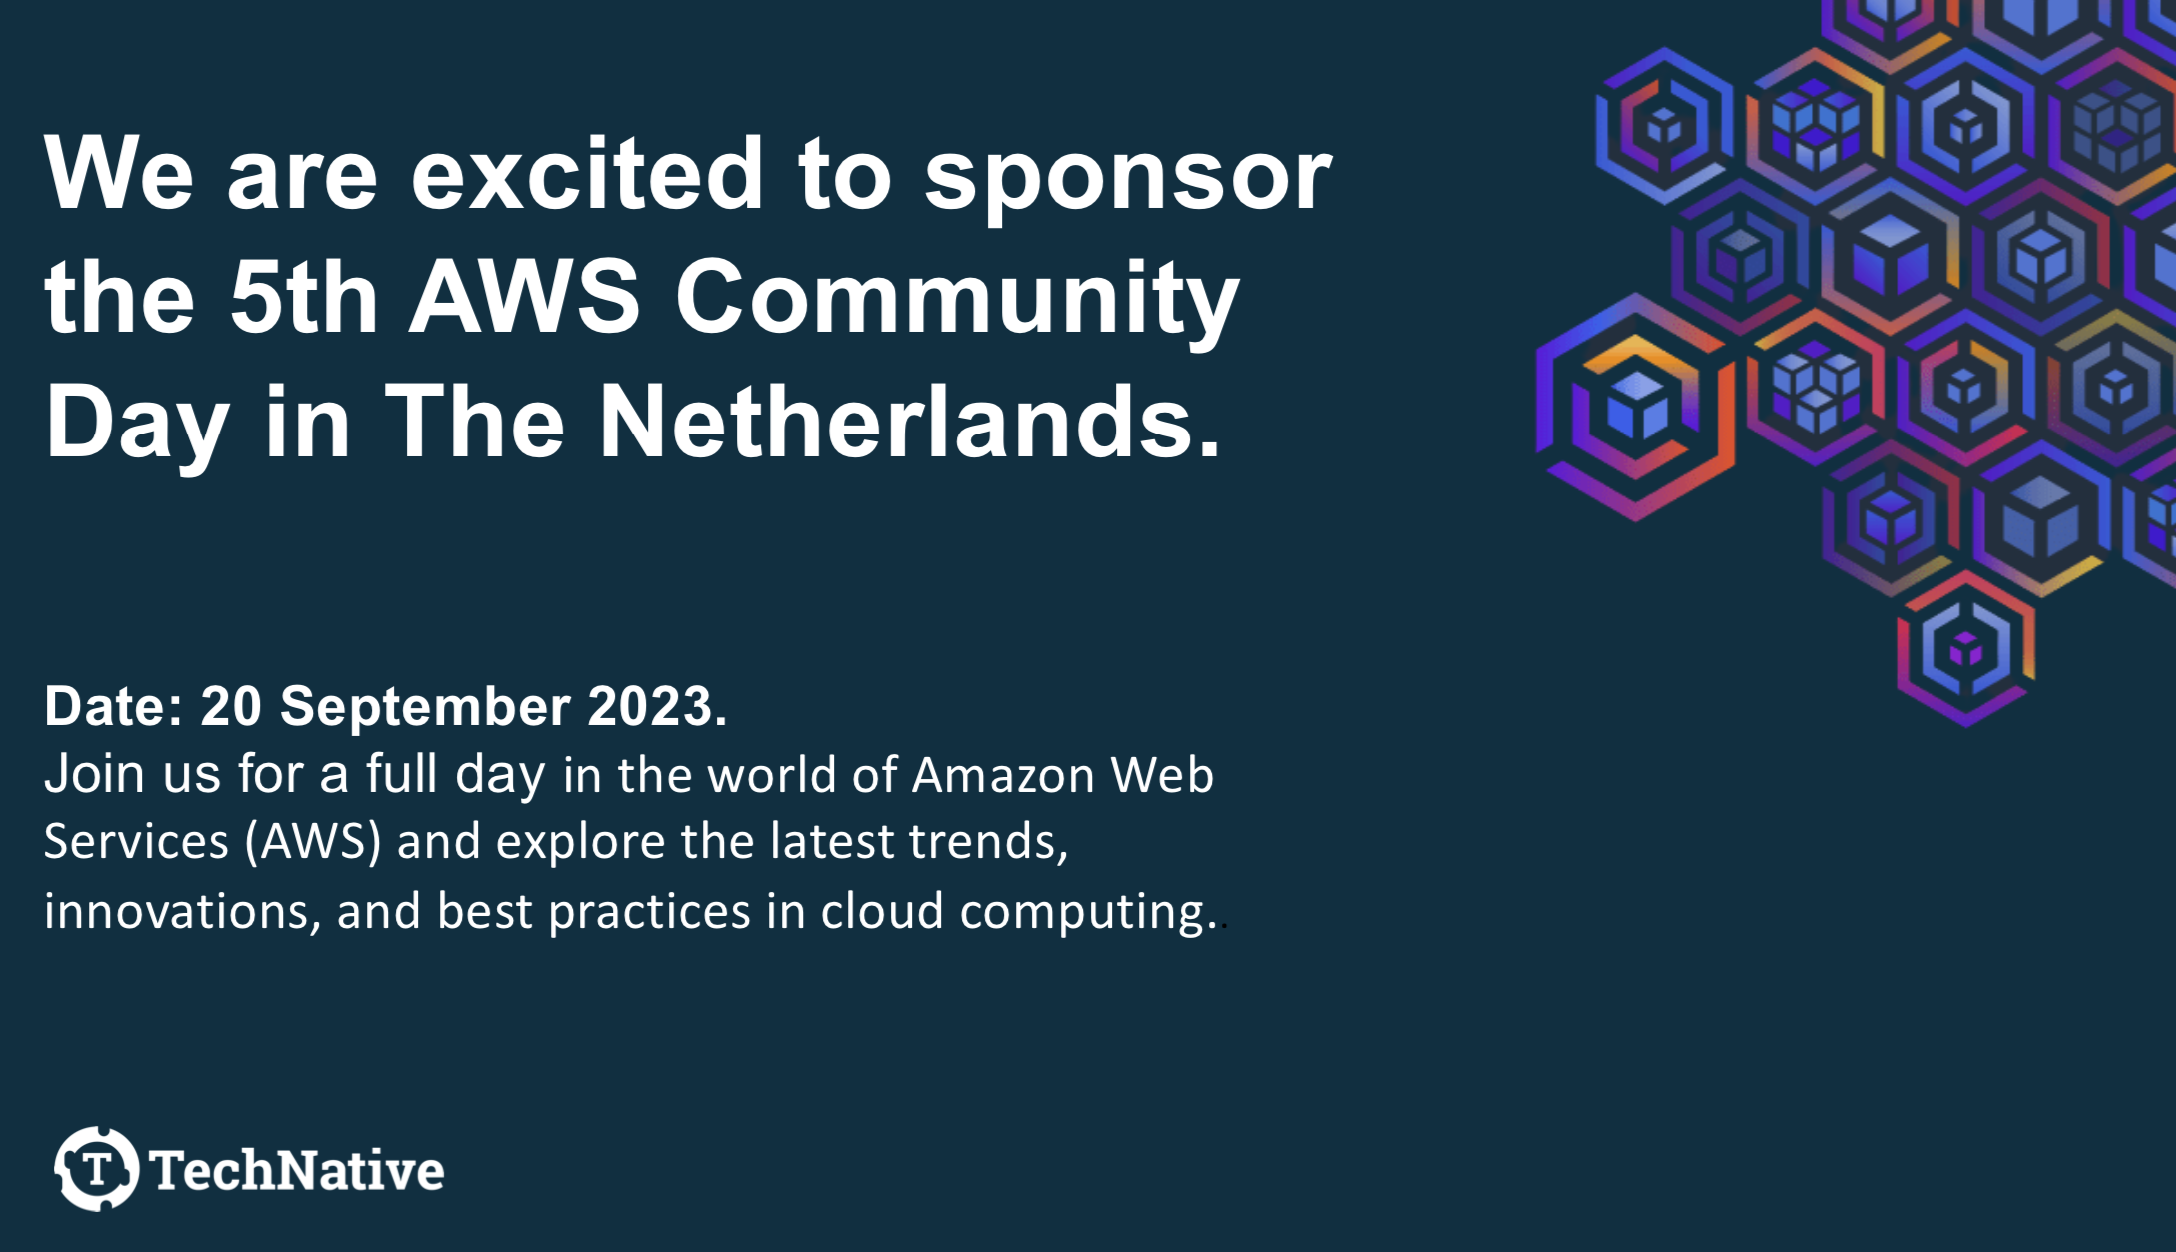 TechNative is official sponsor of the AWS Community Day 2023 in NL